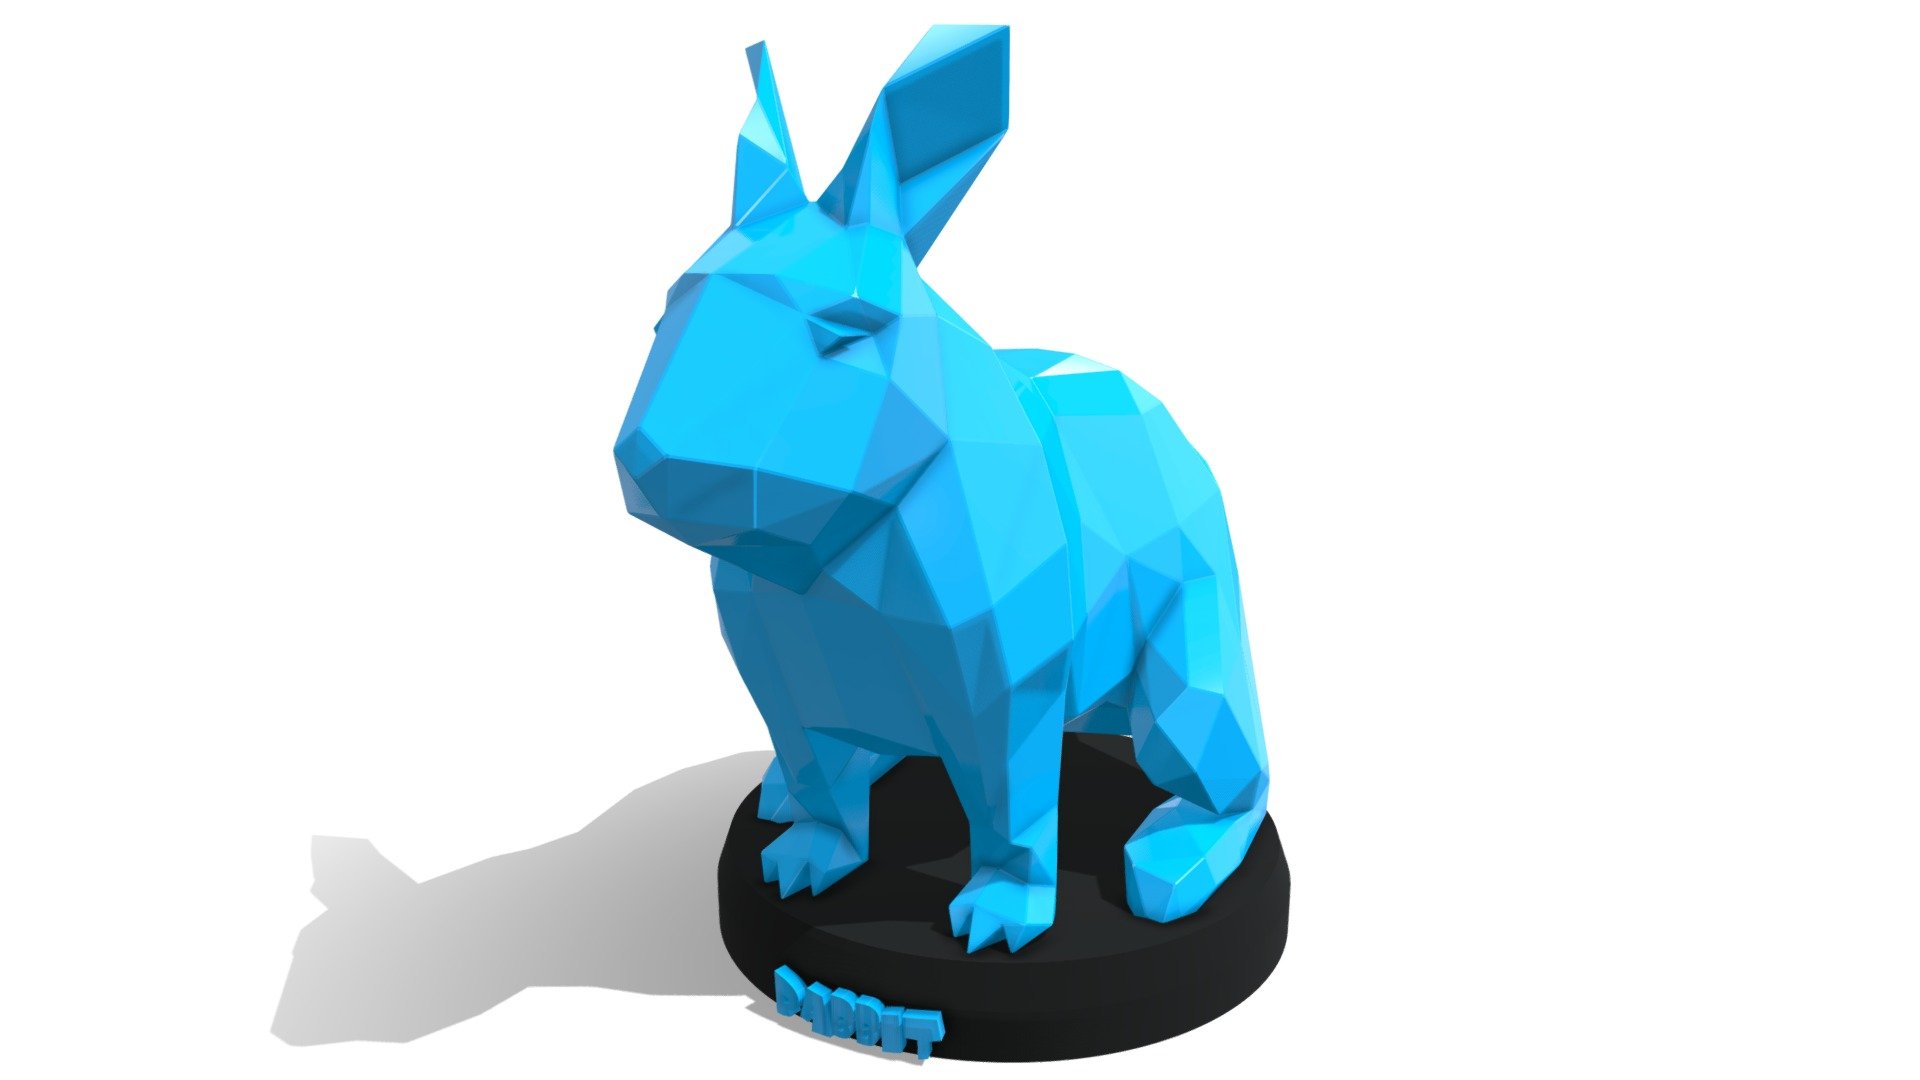 Polygonal 3D Model with Parametric modeling with gold material, make it recommend for :


Basic modeling 
Rigging 
sculpting 
Become Statue
Decorate
3D Print File
Toy

Have fun  :) - Poly Rabbit - Buy Royalty Free 3D model by Puppy3D 3d model